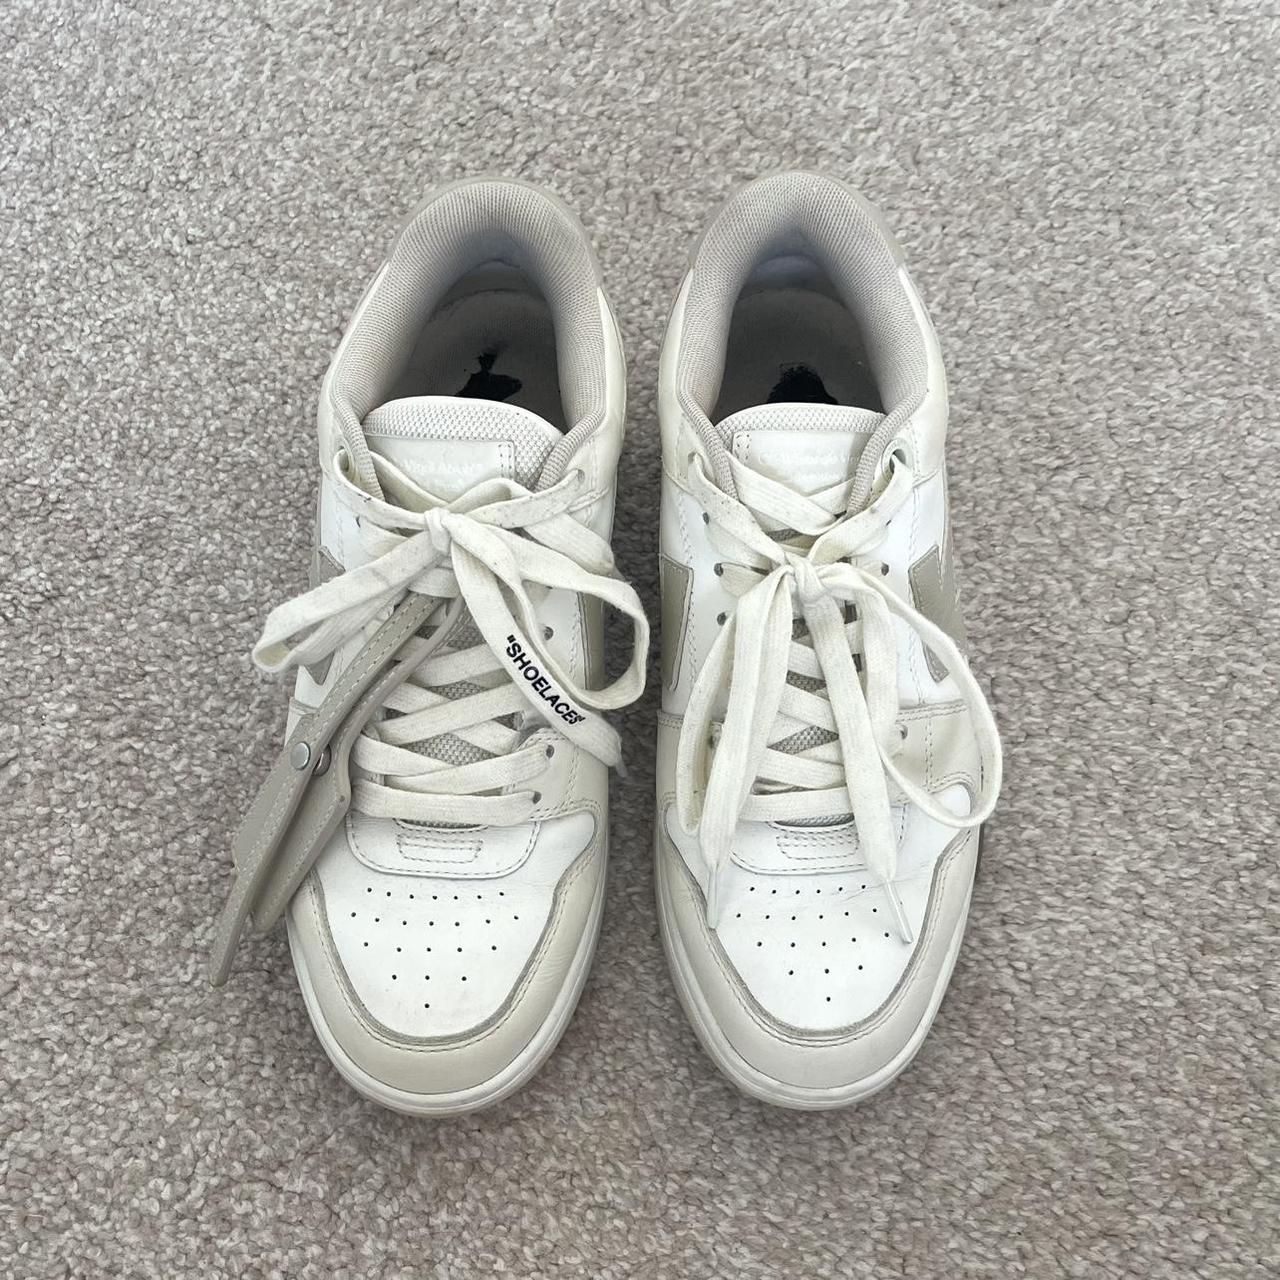 Off White trainers Good condition just need a... - Depop